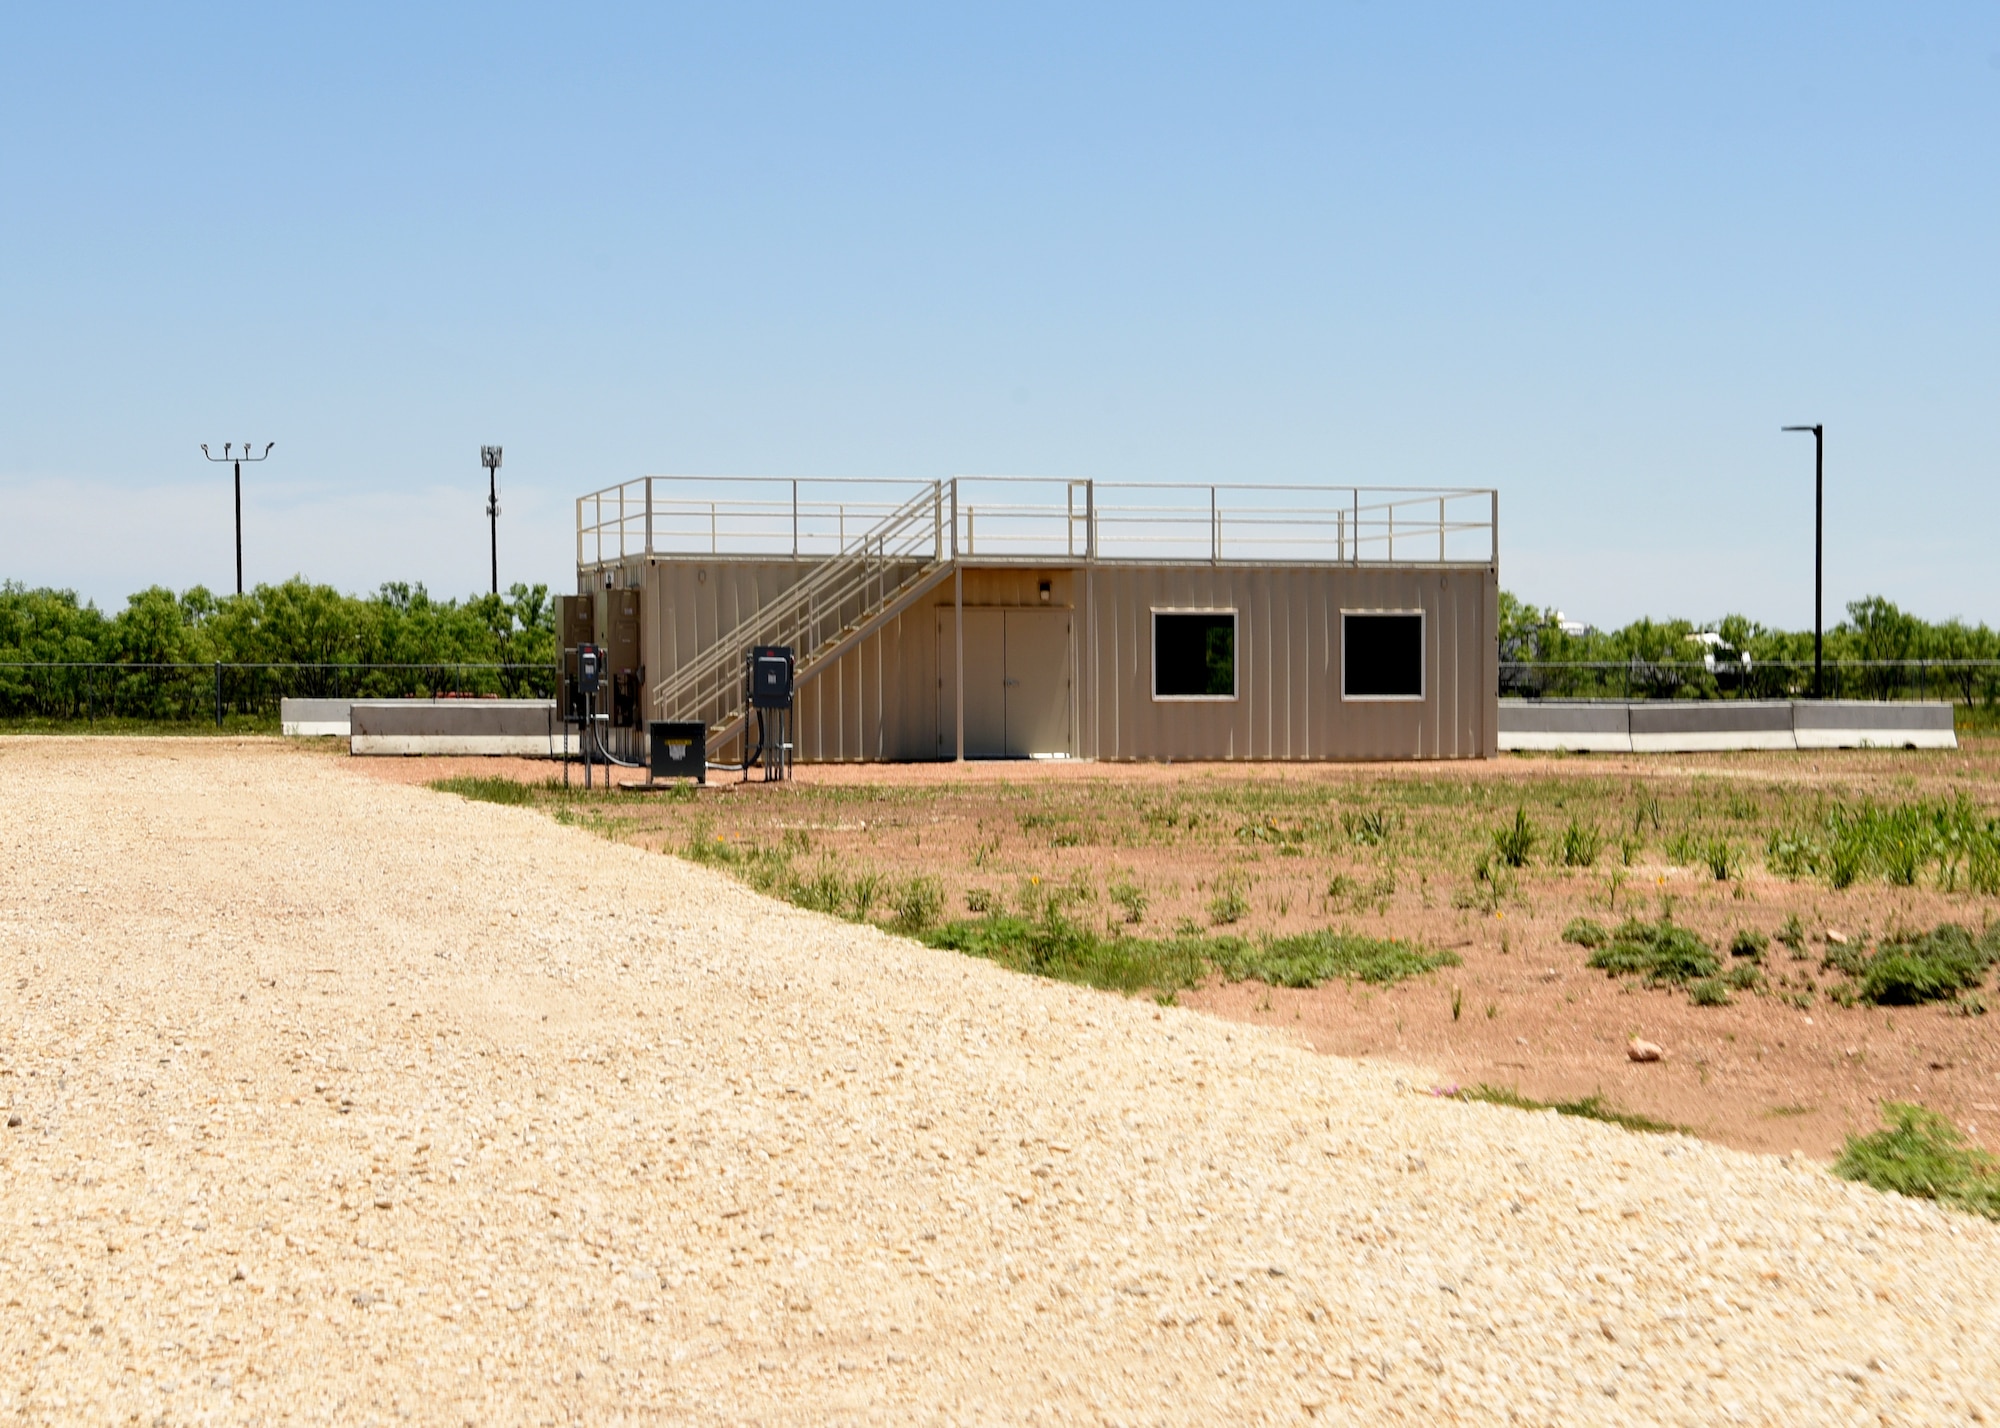 A new ground cover fire trainer building stands at the Louis F. Garland Department of Defense Fire Academy on Goodfellow Air Force Base, Texas, May 21, 2021. The trainer has a rehabilitation room inside for on-site training and added safety features to prevent heat related injuries while training. (U.S. Air Force photo by Senior Airman Abbey Rieves)